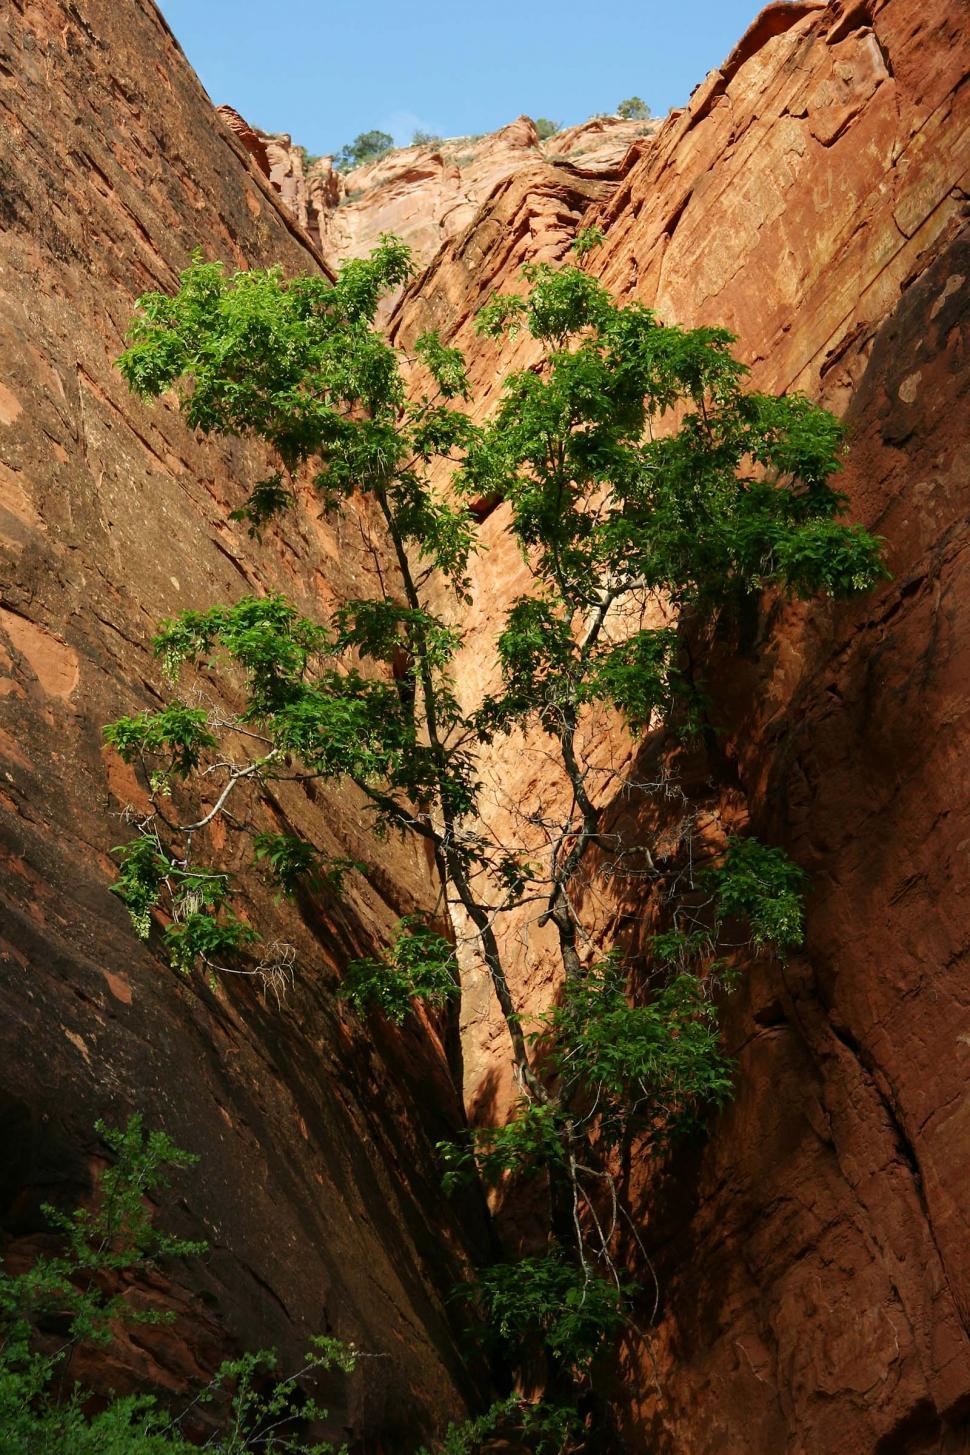 Free Image of Small Tree Growing in Narrow Canyon 